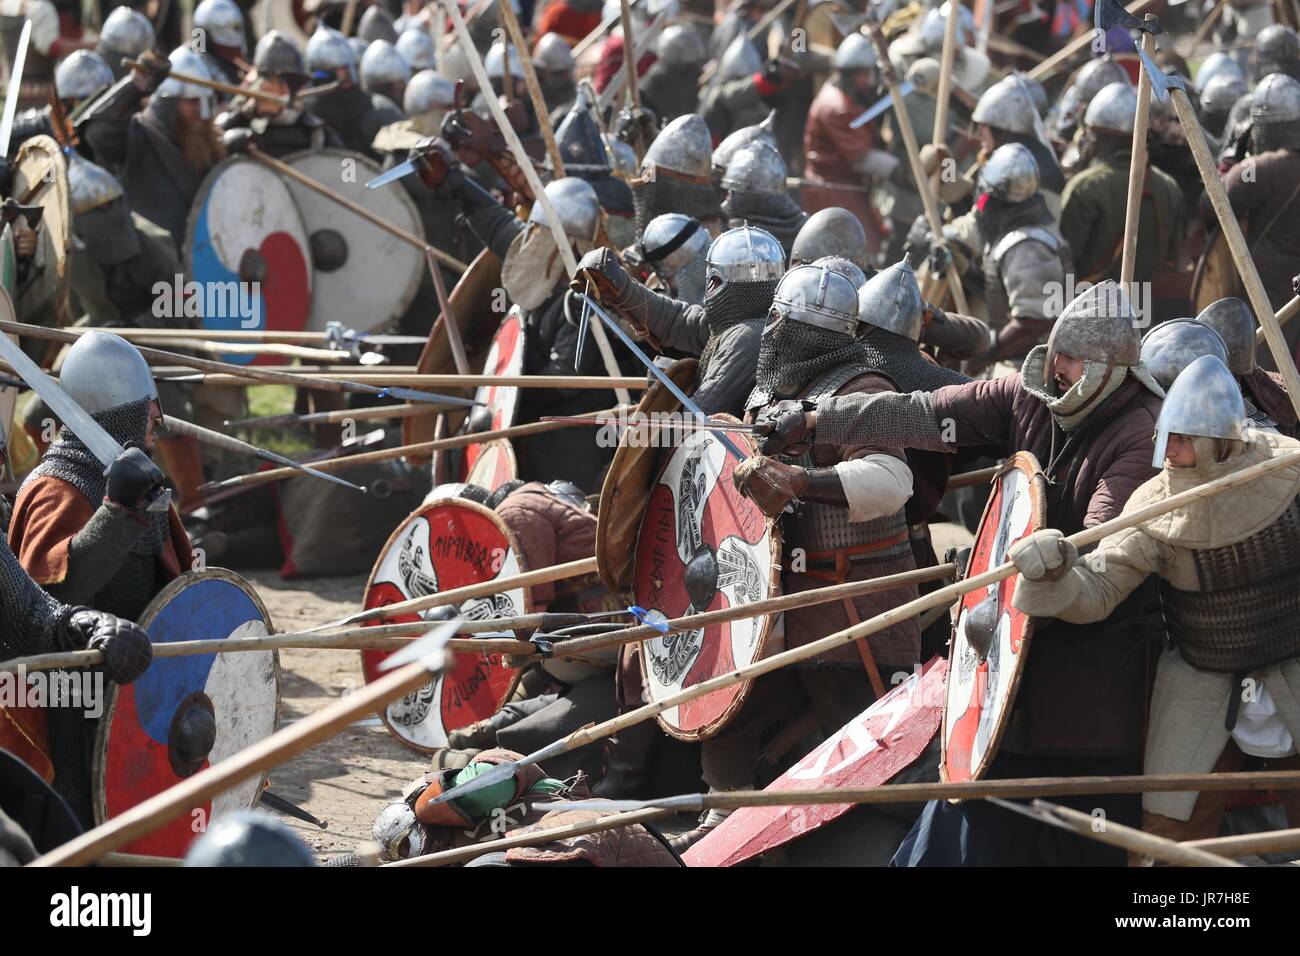 Wolin, Poland. 4th Aug, 2017. 23rd Viking and Slavic Festival on August 4,  2017 in Wolin, Poland. Credit: East News sp. z o.o./Alamy Live News Stock  Photo - Alamy